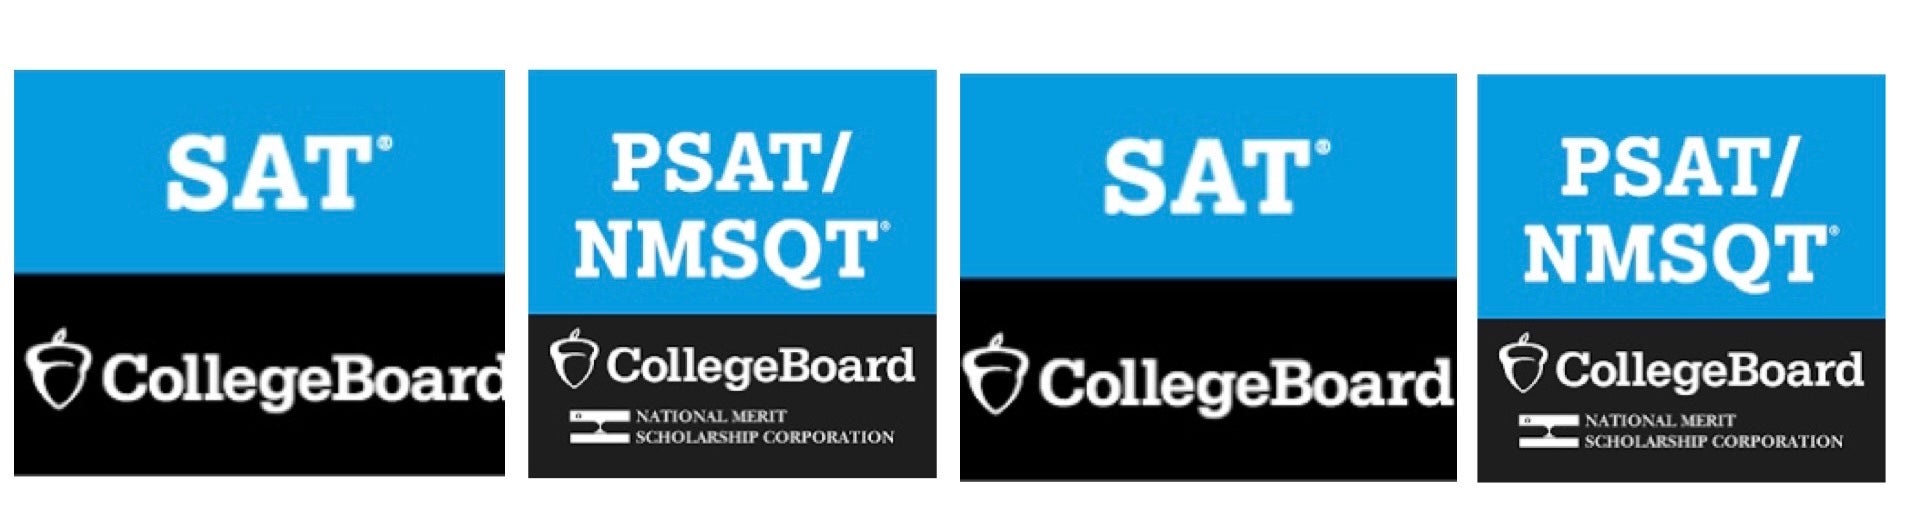 SAT College Board and PSAT NMSQT College Board Banner Logos